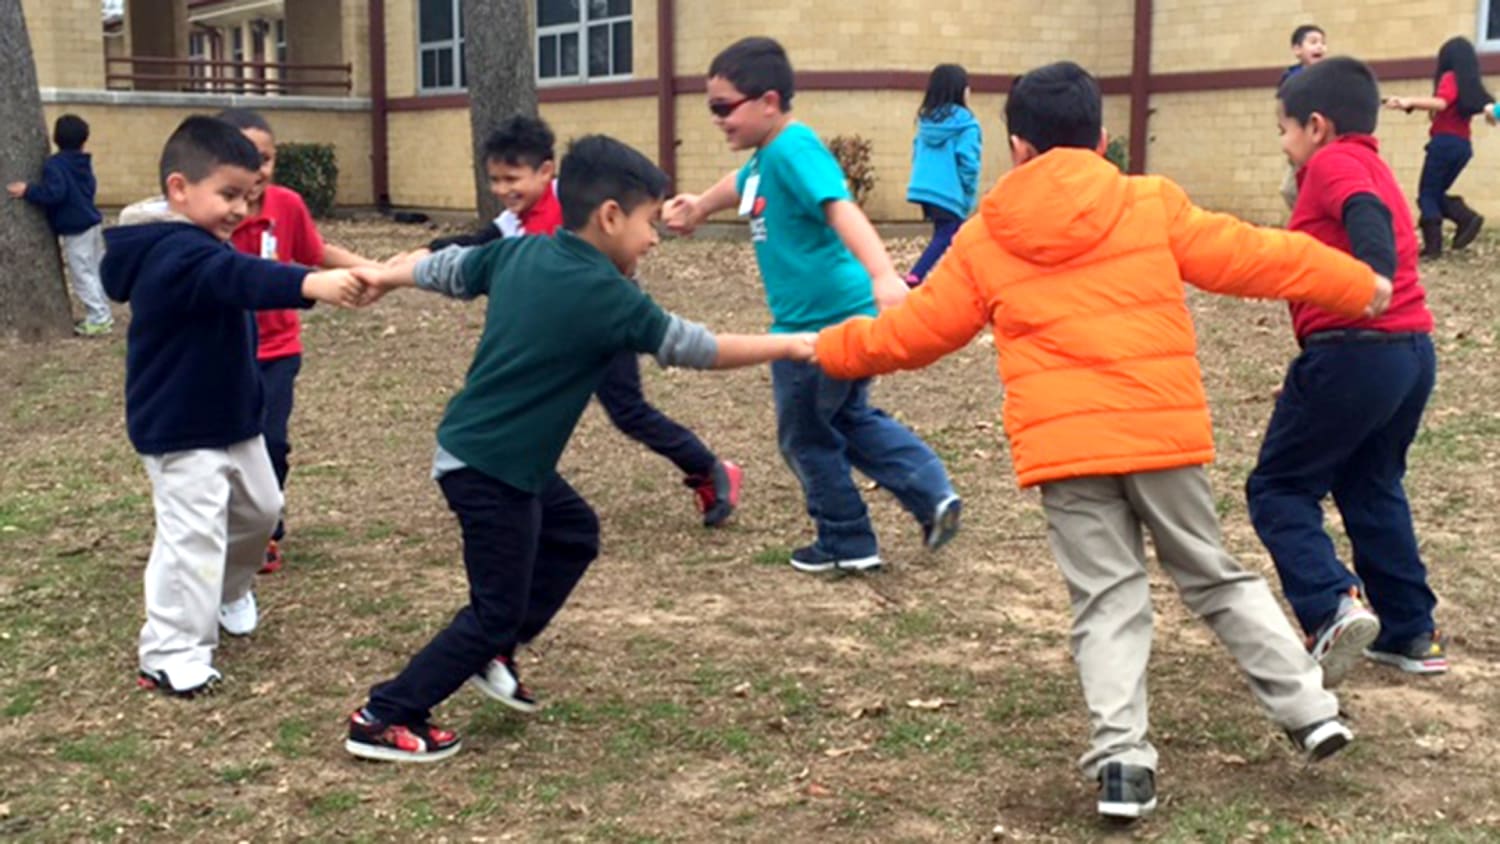 Here's what happened when a school tried recess four times a day